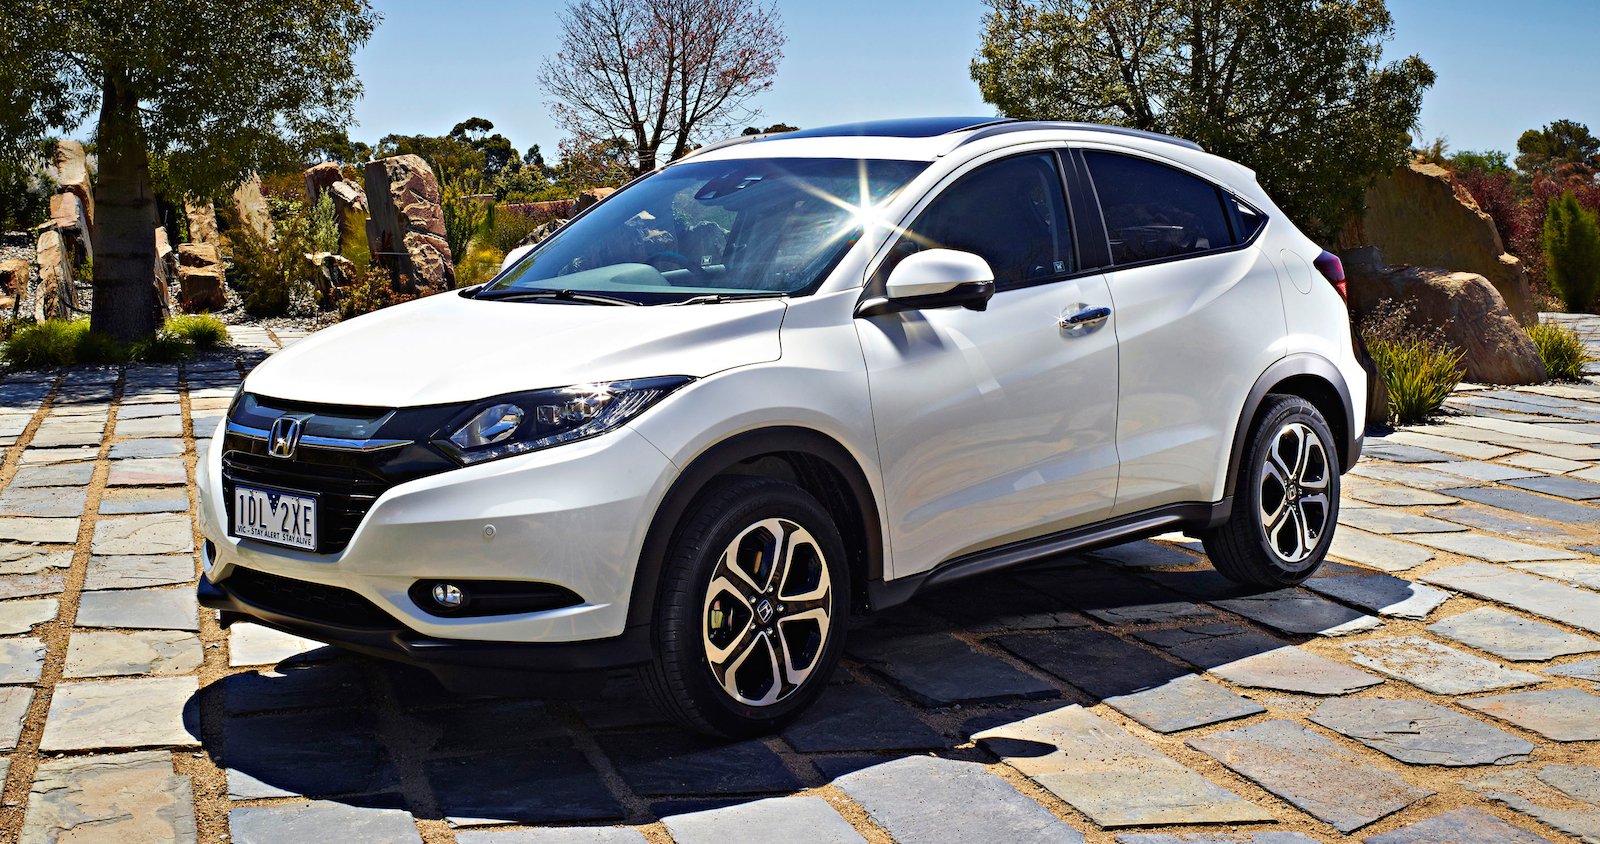 2015 Honda HRV Pricing and specifications Photos (1 of 1)